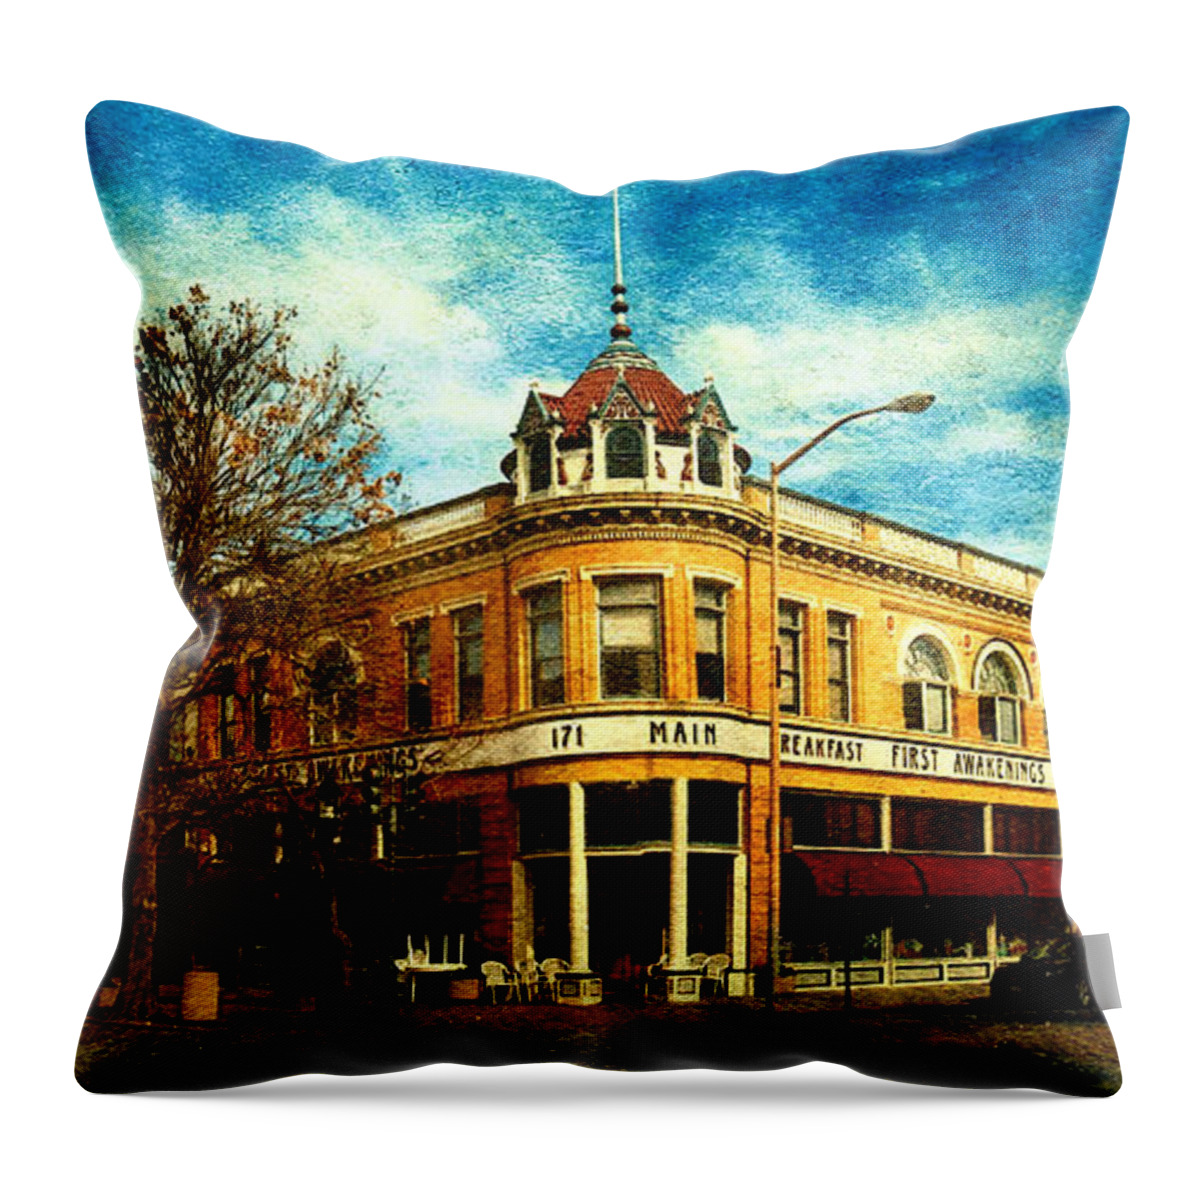 Mcdougall Building Throw Pillow featuring the digital art McDougall Building in downtown Salinas, California by Nicko Prints